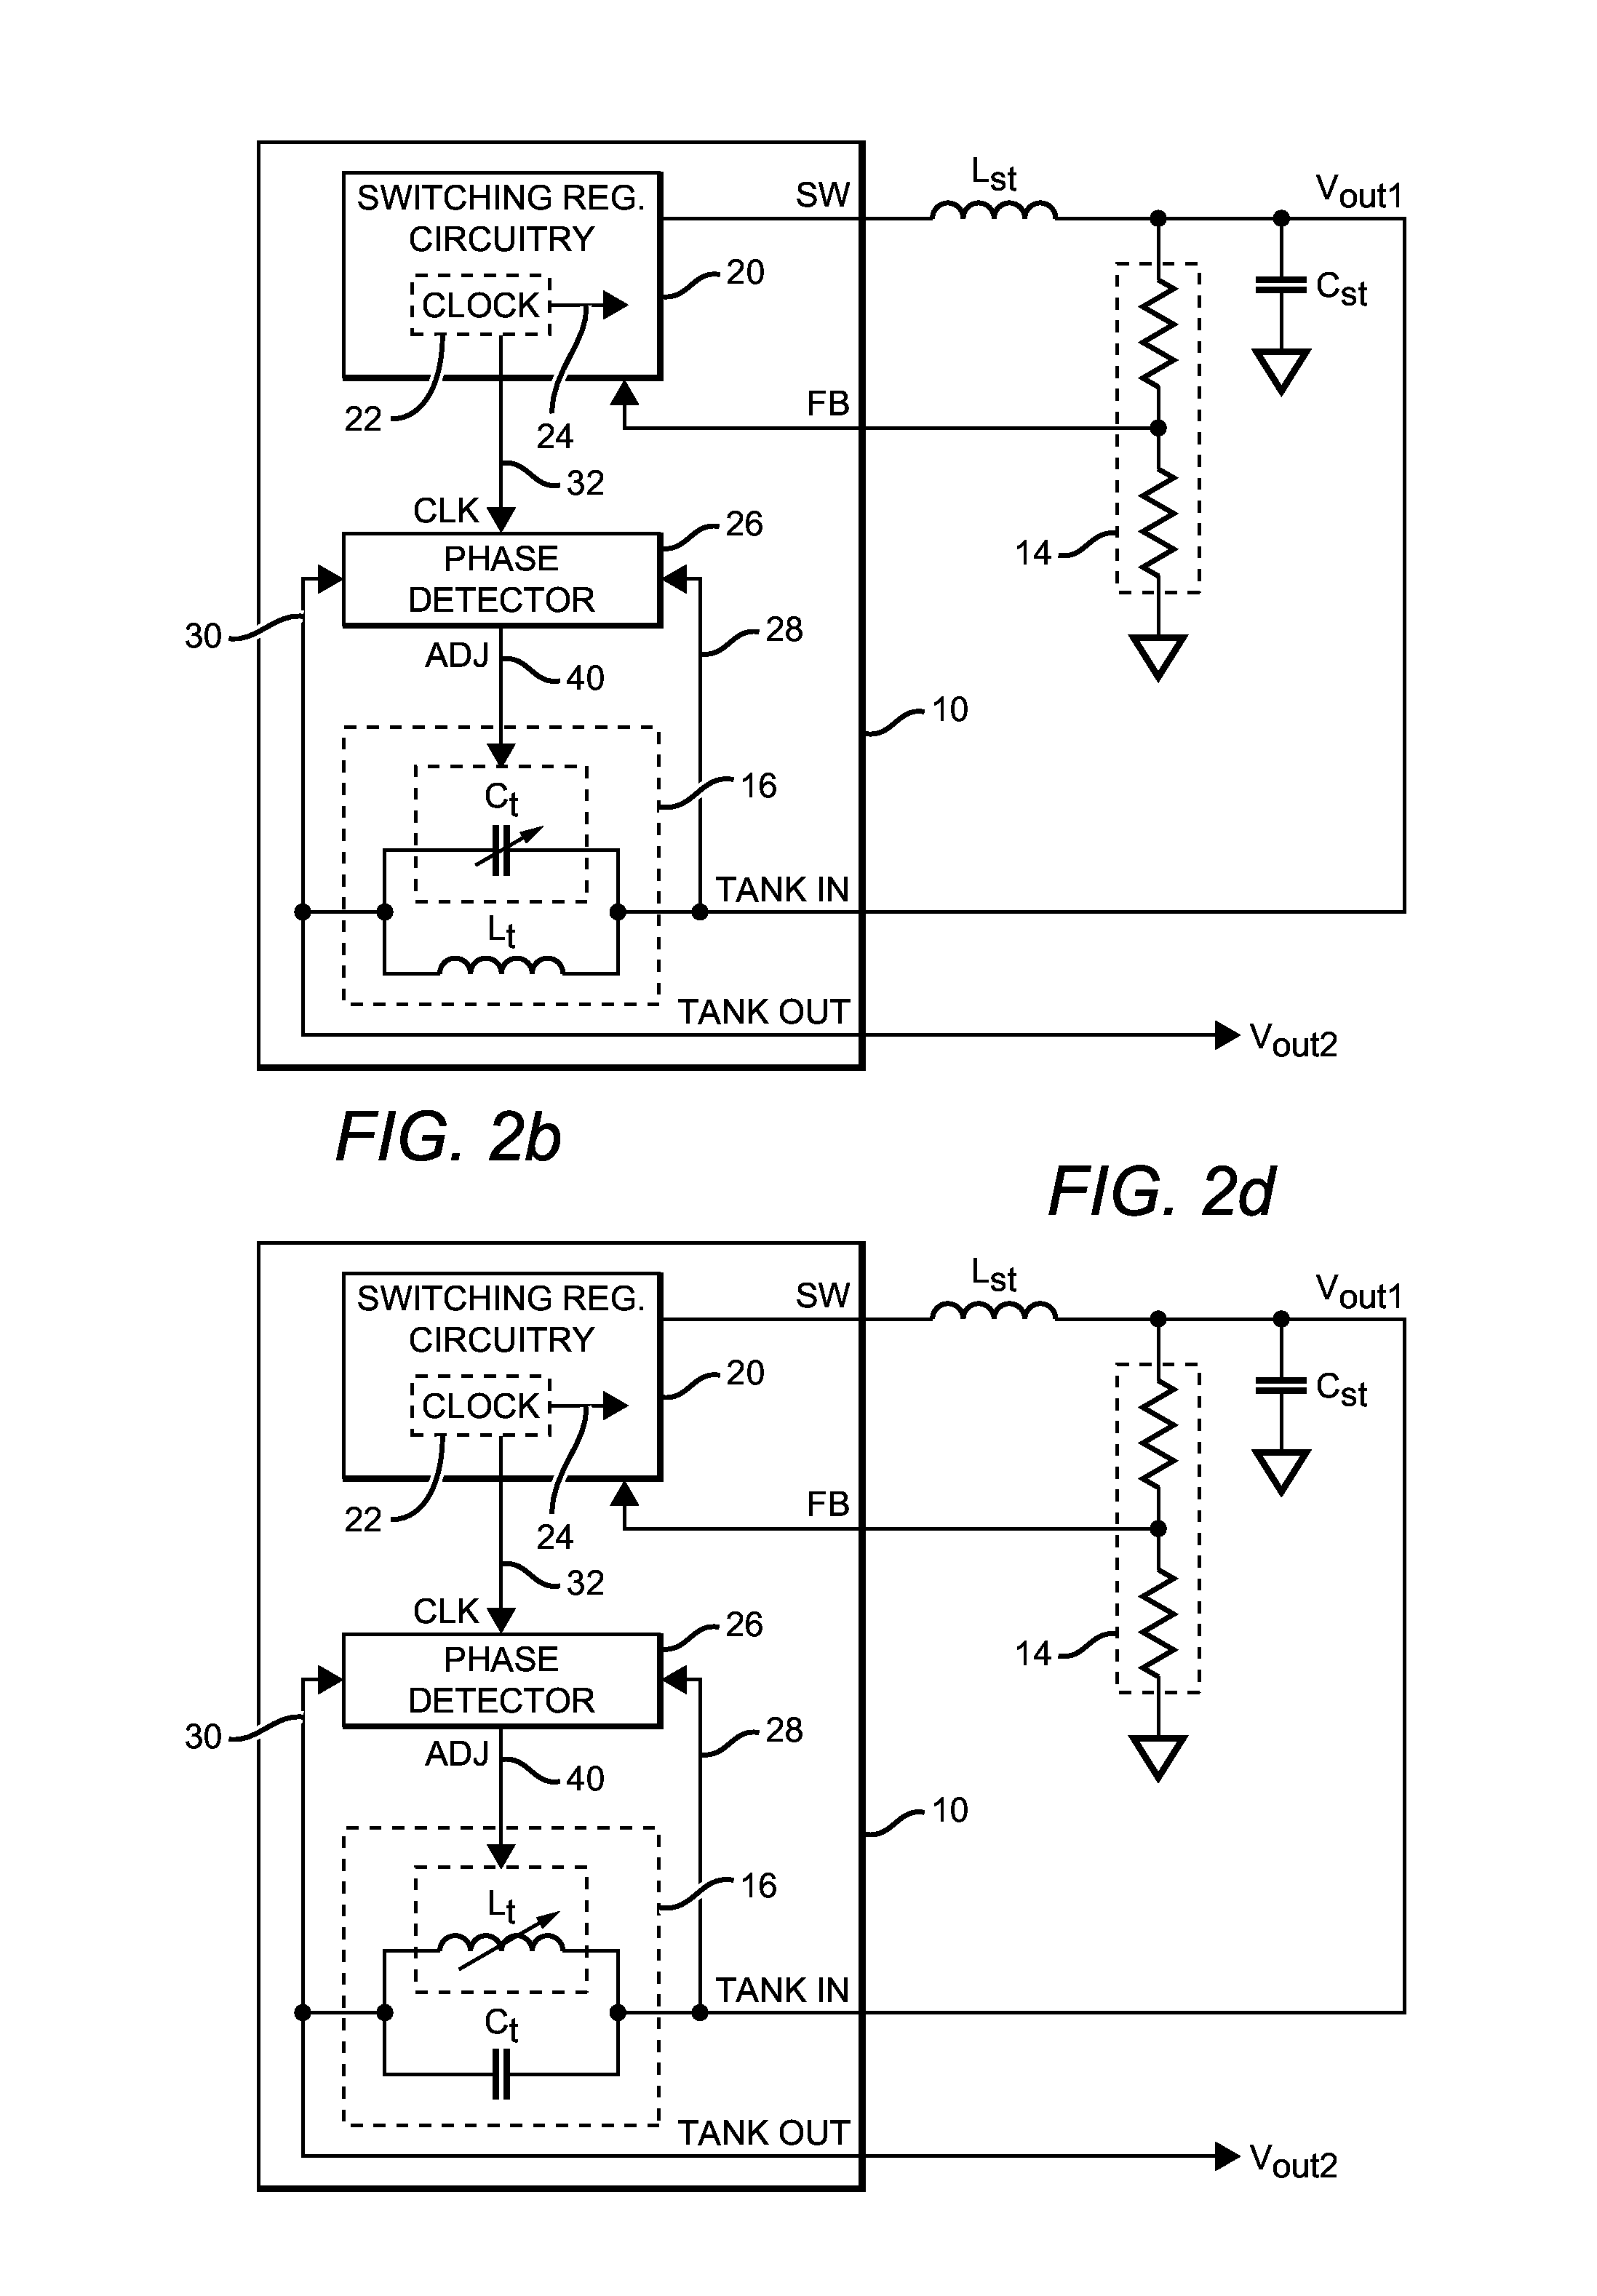 Switching regulator with integrated resonant circuit for ripple filtering